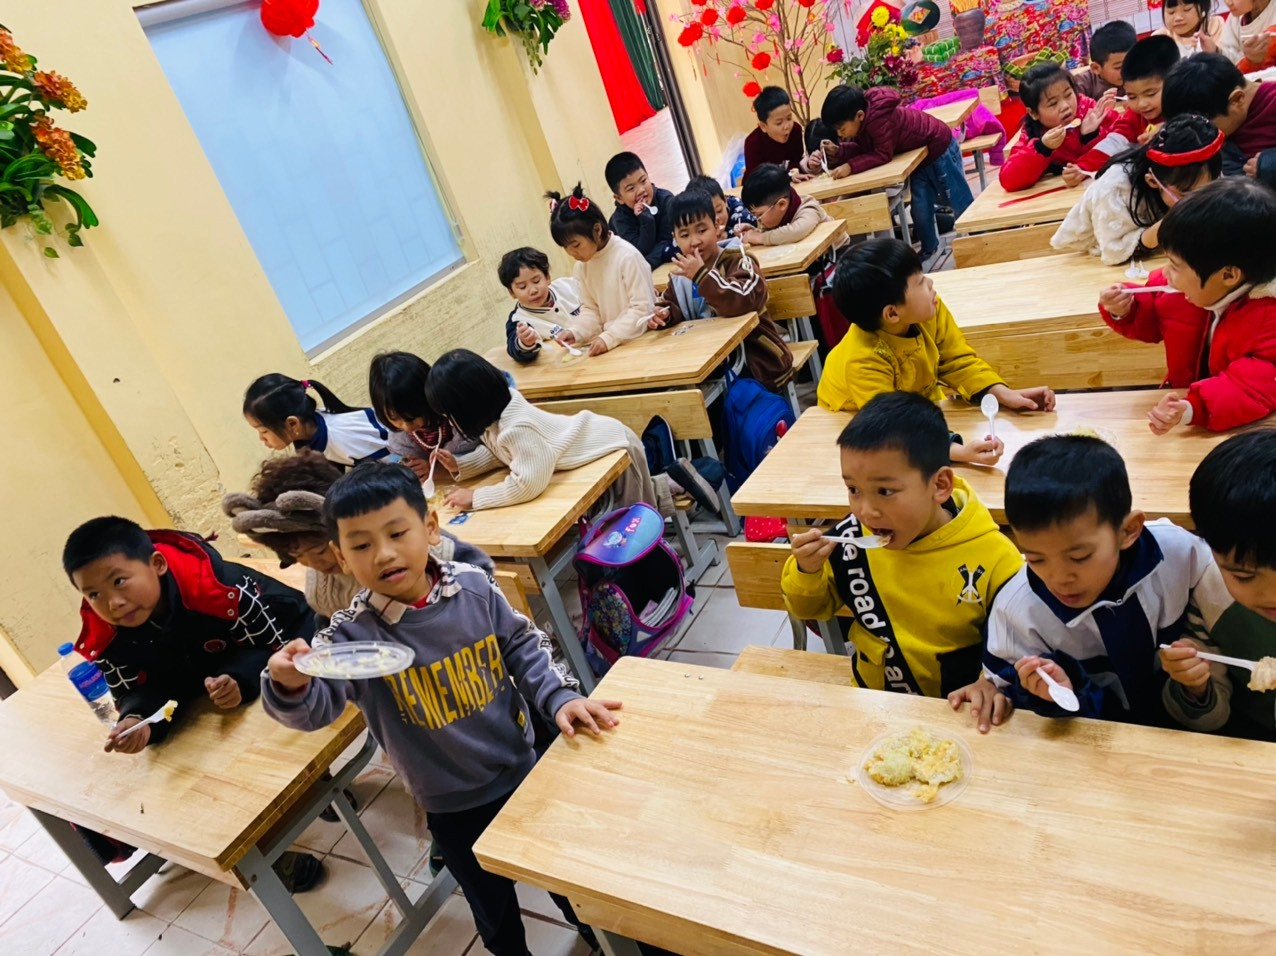 A group of children eating in a classroom  Description automatically generated